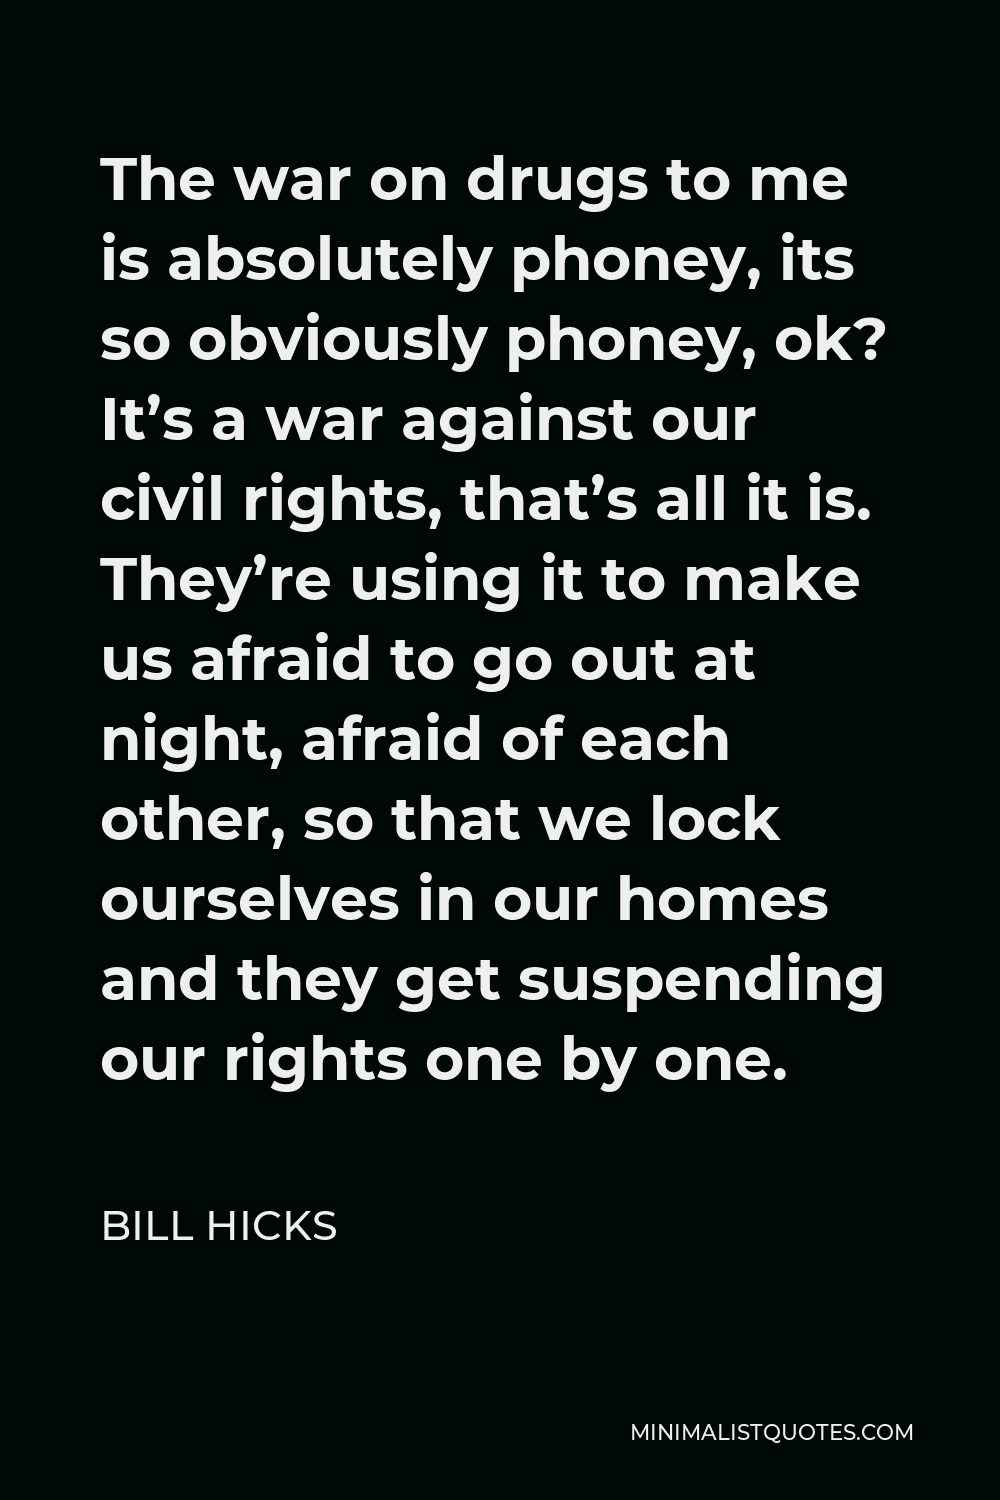 Bill Hicks Quote - The war on drugs to me is absolutely phoney, its so obviously phoney, ok? It’s a war against our civil rights, that’s all it is. They’re using it to make us afraid to go out at night, afraid of each other, so that we lock ourselves in our homes and they get suspending our rights one by one.